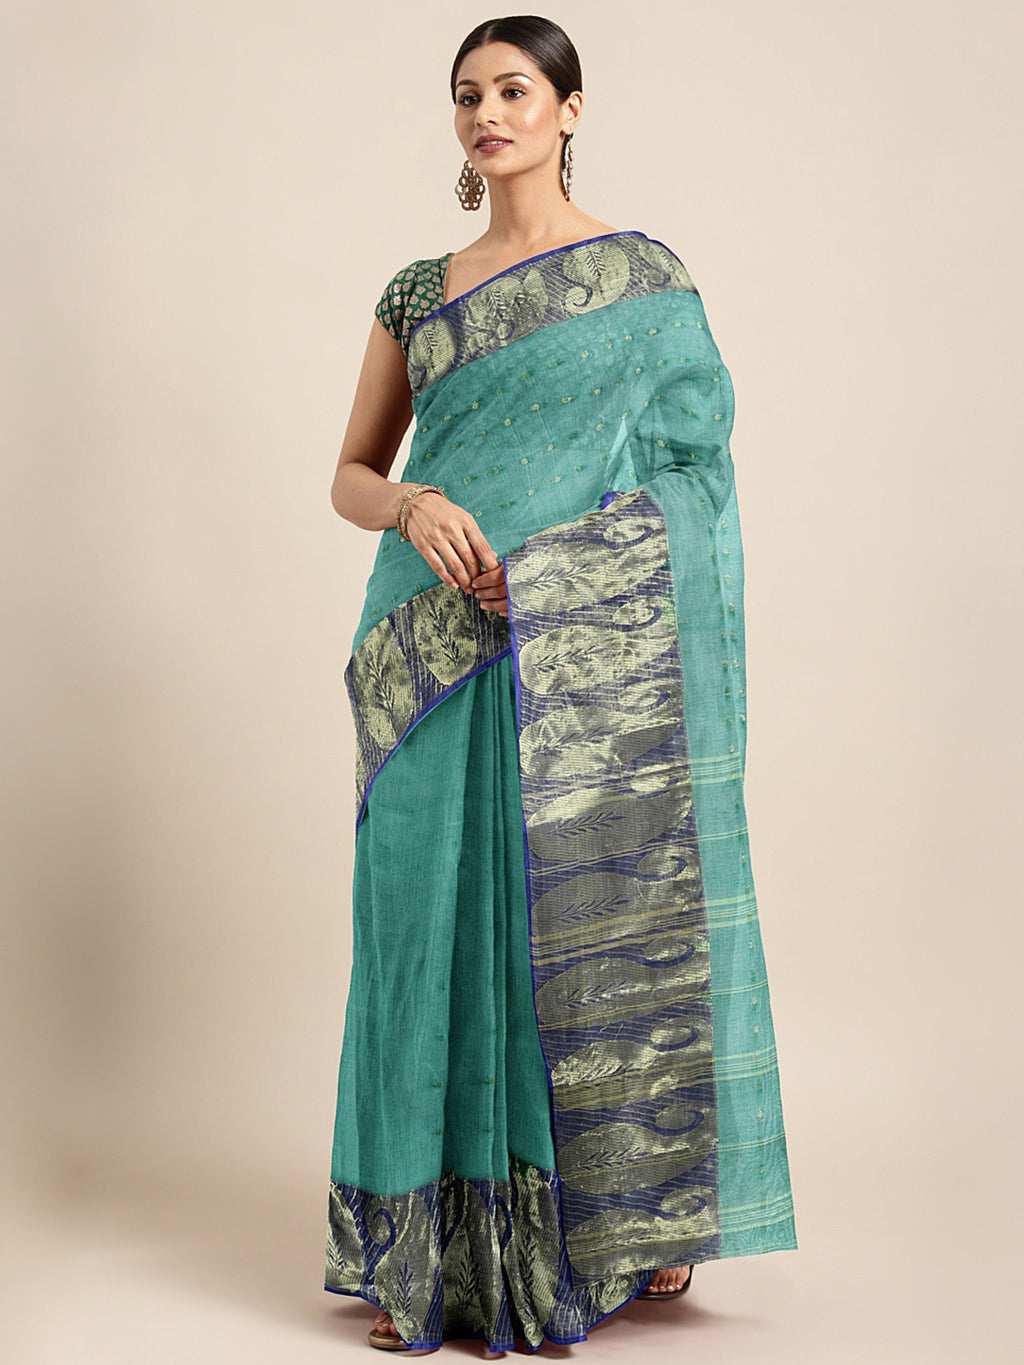 Green Tant Woven Design Saree Without Blouse Piece DUTASA020 DUTASA020-Saree-Kalakari India-DUTASA020-Geographical Indication, Hand Crafted, Heritage Prints, Natural Dyes, Sarees, Silk Cotton, Sustainable Fabrics, Taant, Tant, West Bengal, Woven-[Linen,Ethnic,wear,Fashionista,Handloom,Handicraft,Indigo,blockprint,block,print,Cotton,Chanderi,Blue, latest,classy,party,bollywood,trendy,summer,style,traditional,formal,elegant,unique,style,hand,block,print, dabu,booti,gift,present,glamorous,affordabl